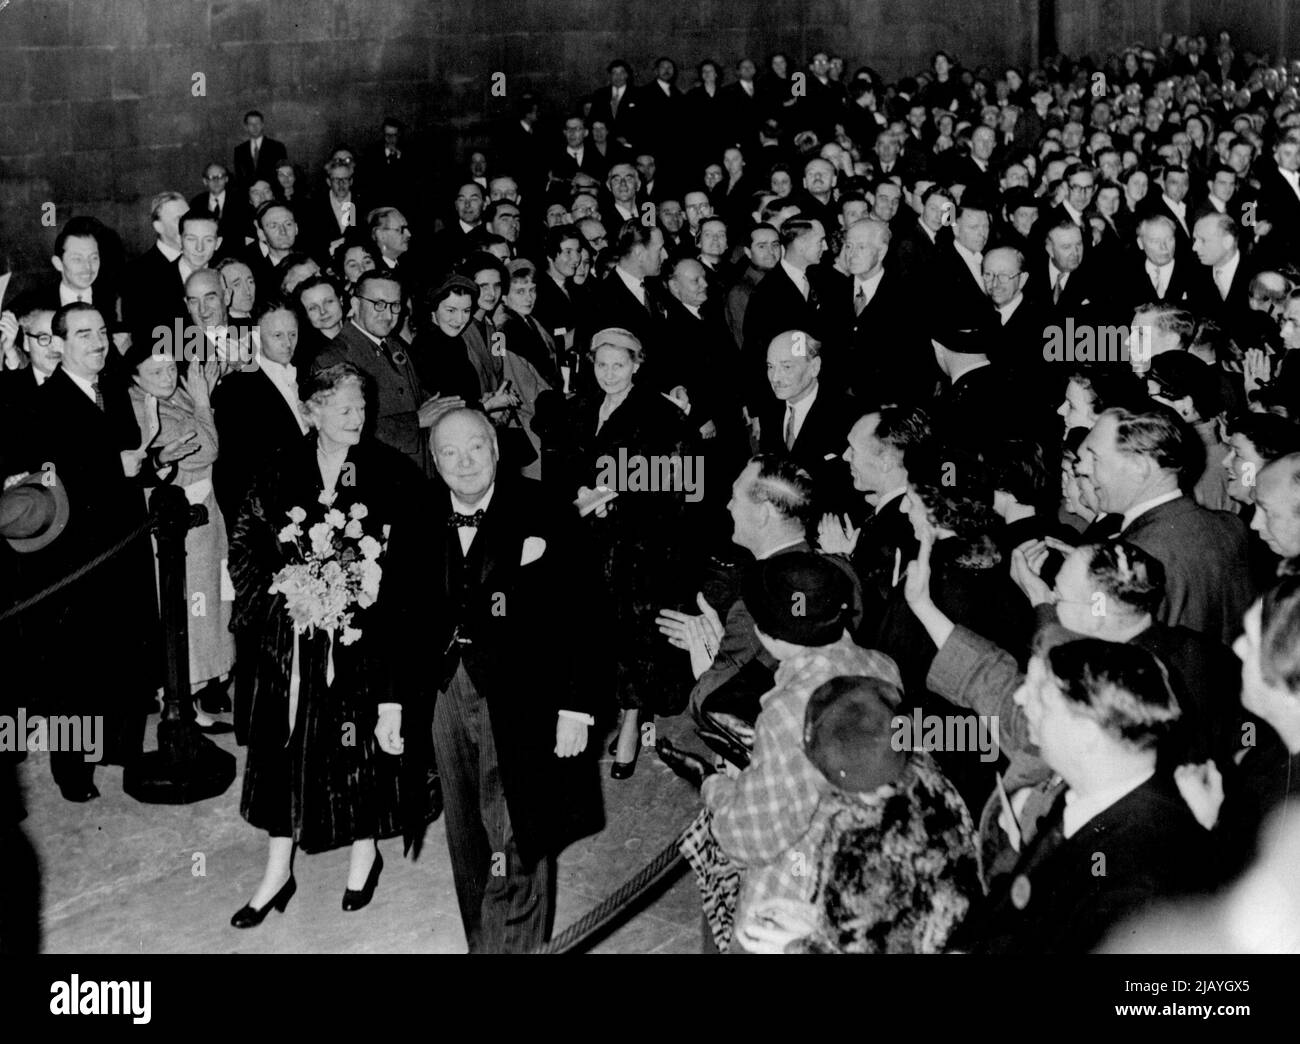 Premier Makes Triumphal Exit From Westminster Hall: Sir Winston and Lady Churchill beam their acknowledgment of the applause as they leave historic Westminster Hall, London, to-day (Tuesday) after the presentations to Sir Winston on his 80th birthday. Following the Prime Minister and his wife are Mr. and Mrs. Clement Attlee. Mr. Attlee had just presented to Sir Winston the joint gift of both houses of parliament - the premier's portrait in oils by Graham Sutherland. Sir Winston had also received the house of commons gift, a commemorative book signed by nearly all the members. November 30, 1954 Stock Photo